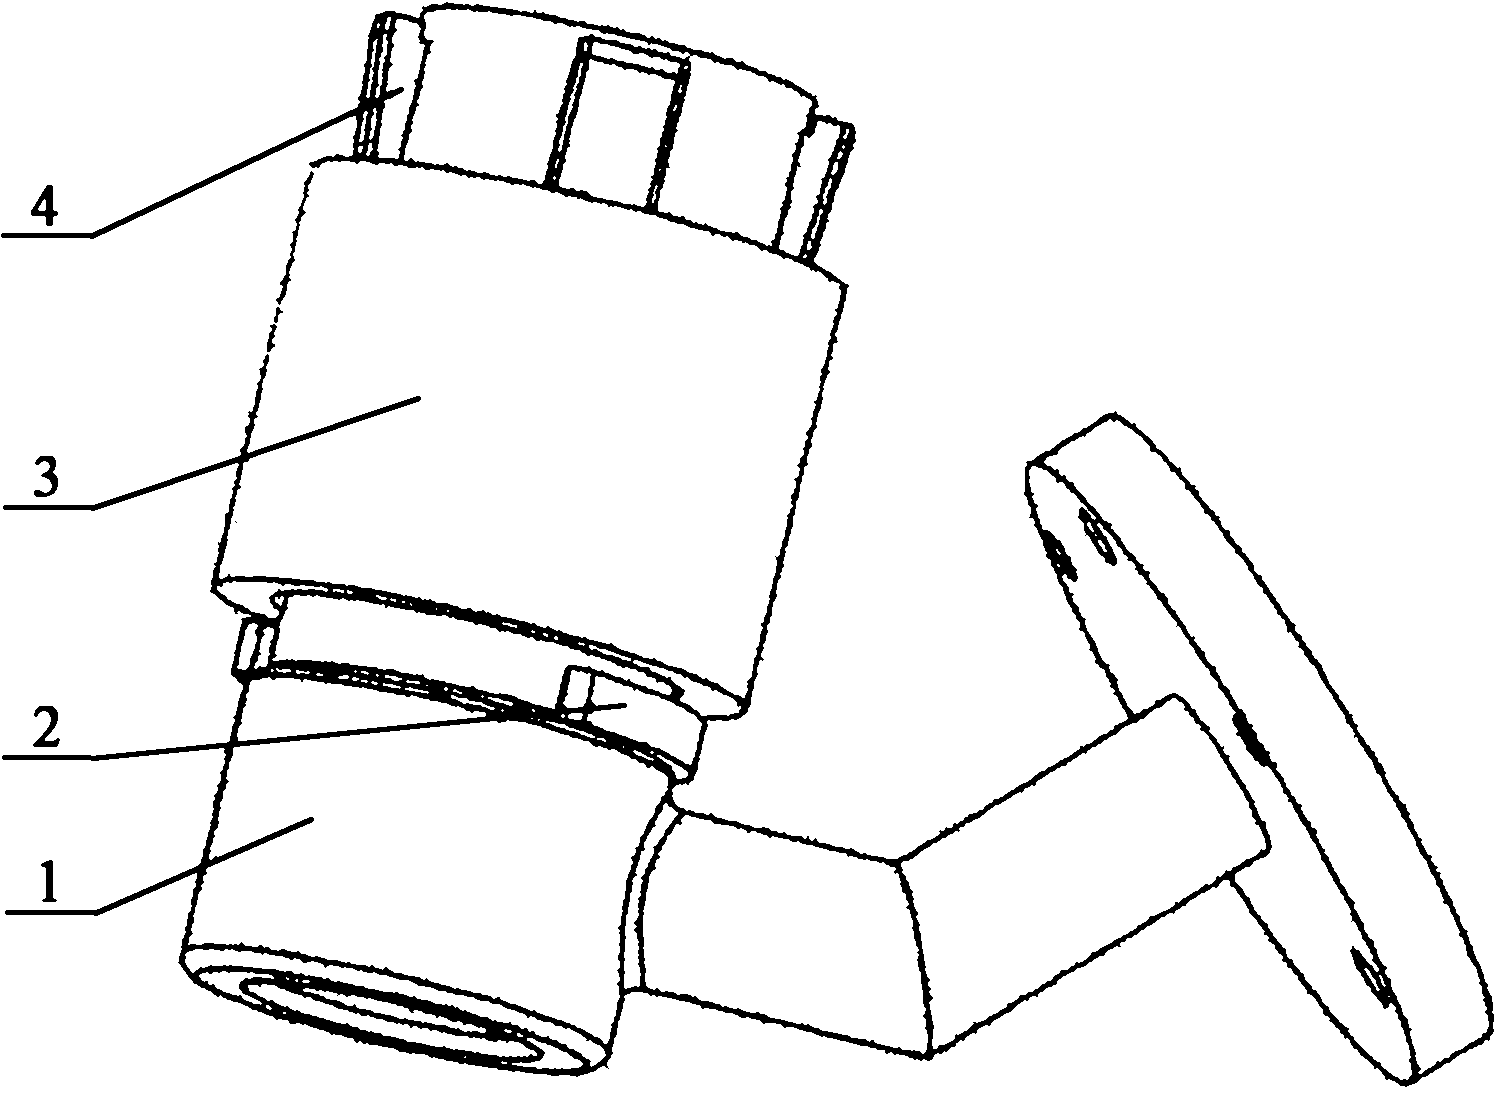 Tubular holder for holding tail end of mechanical arm of holding bone drill